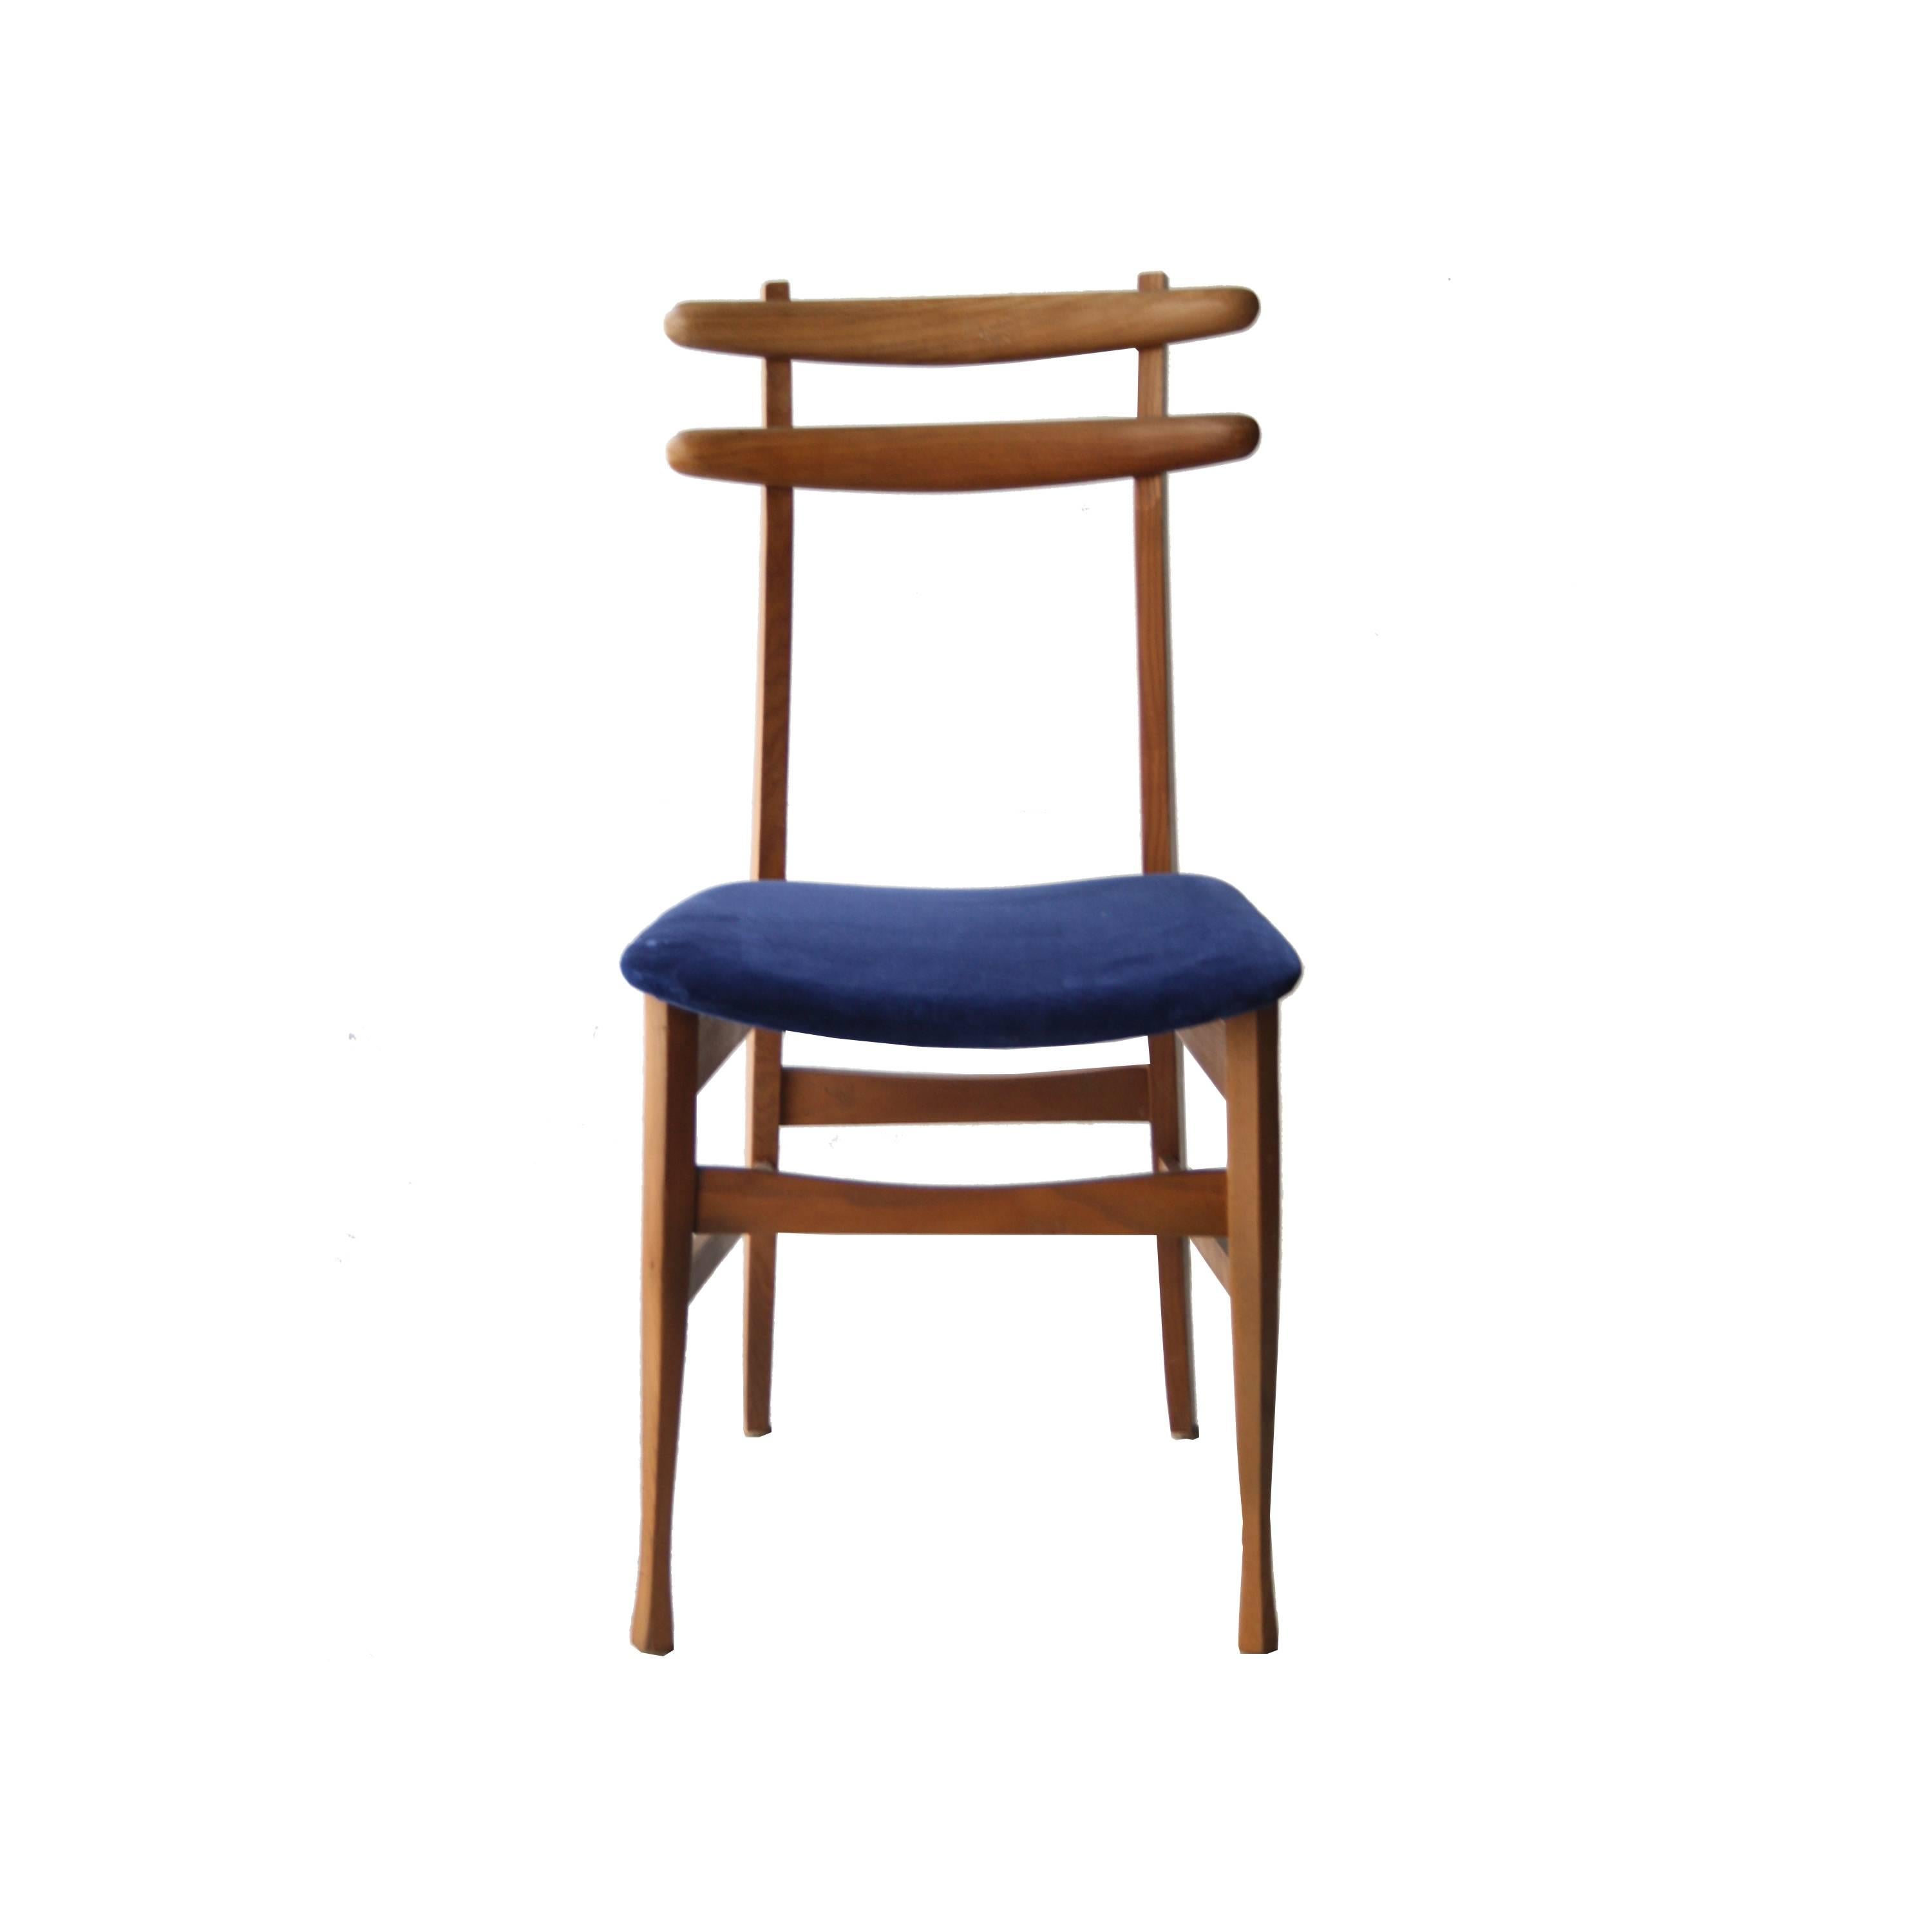 Set of six chairs with solid teak wood structure attributed to Vitorio Dassi. Seat upholstered in cotton blue velvet.